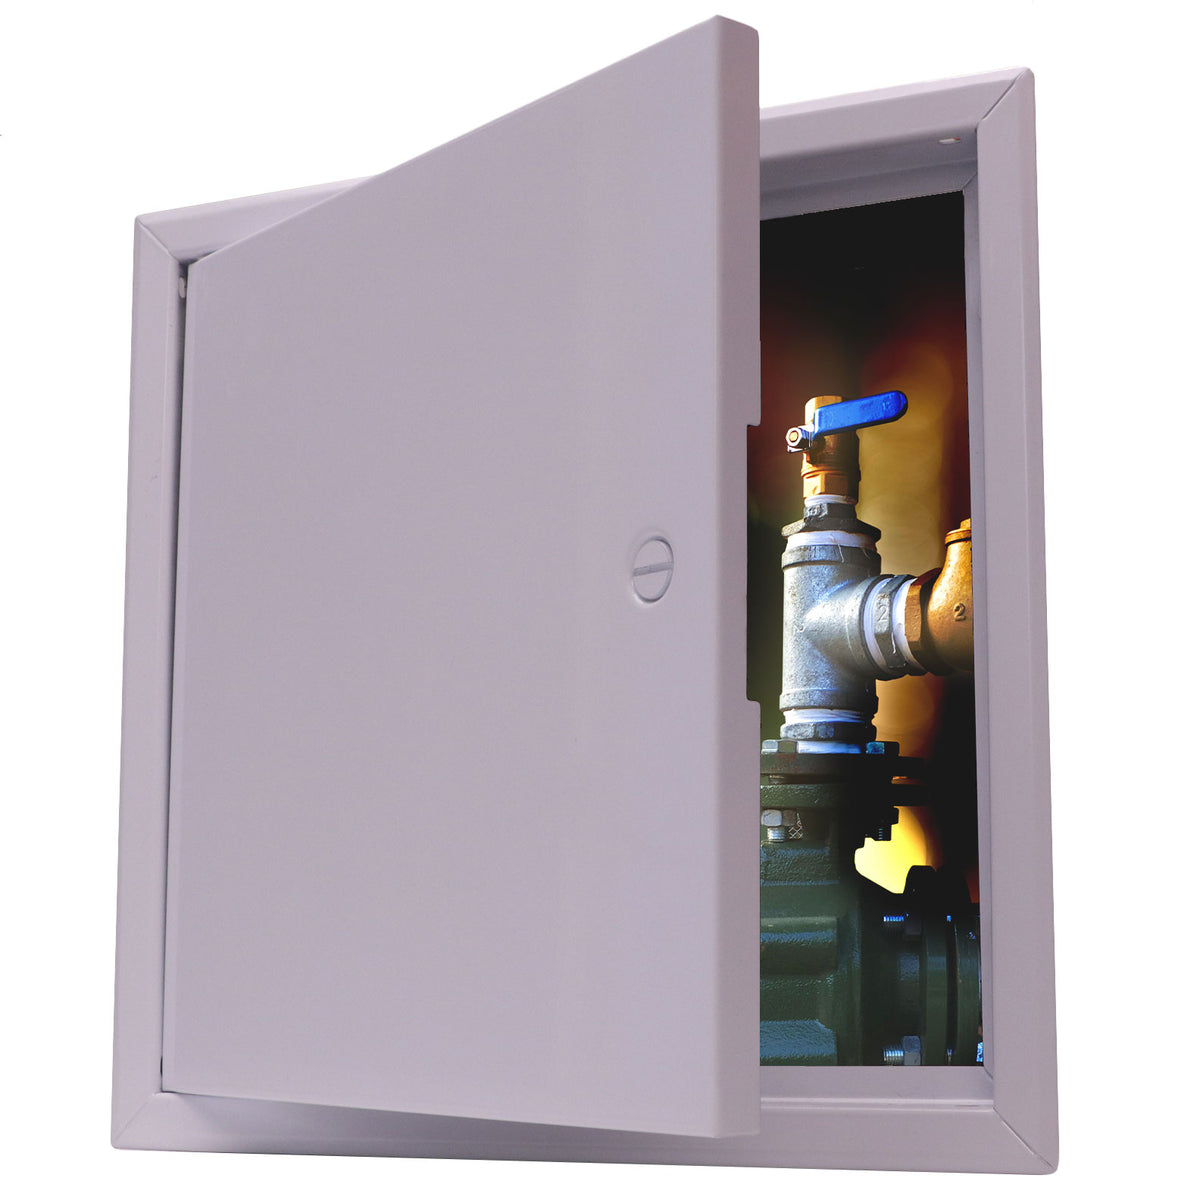 12&quot; X 12&quot; Steel Access Panel Removable Door For Concealed Wall / Ceiling Application With Slotted Lock - [Outer Dimensions: 13&quot; Width X 13&quot; Height]